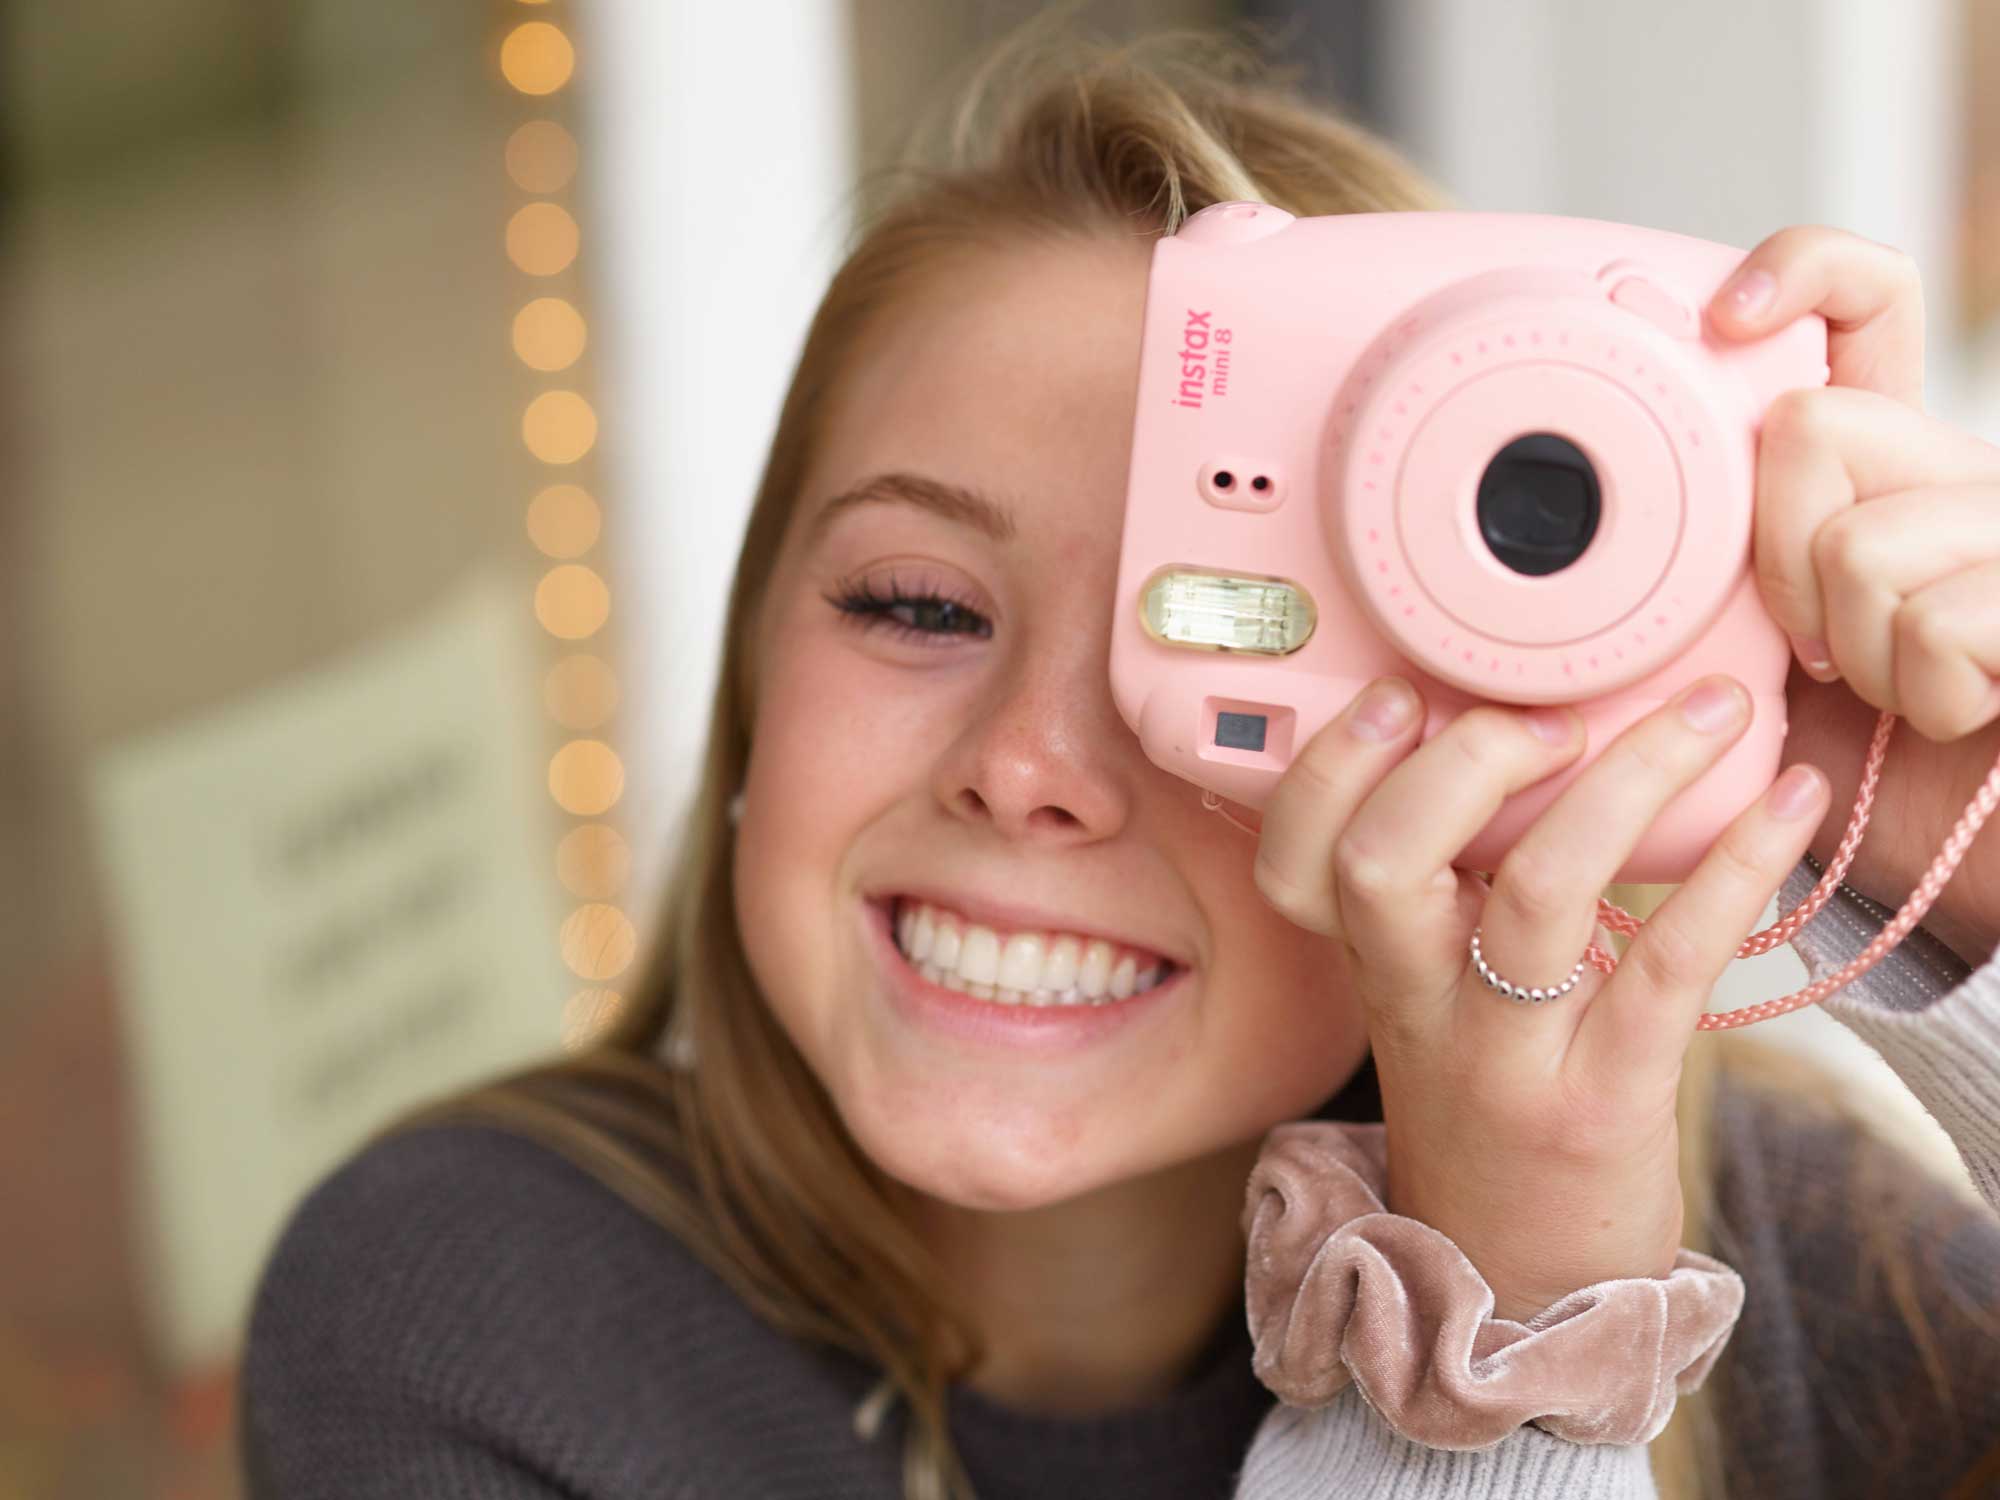 A teen girl with red hair smiling and taking a photo with a Polaroid camera.